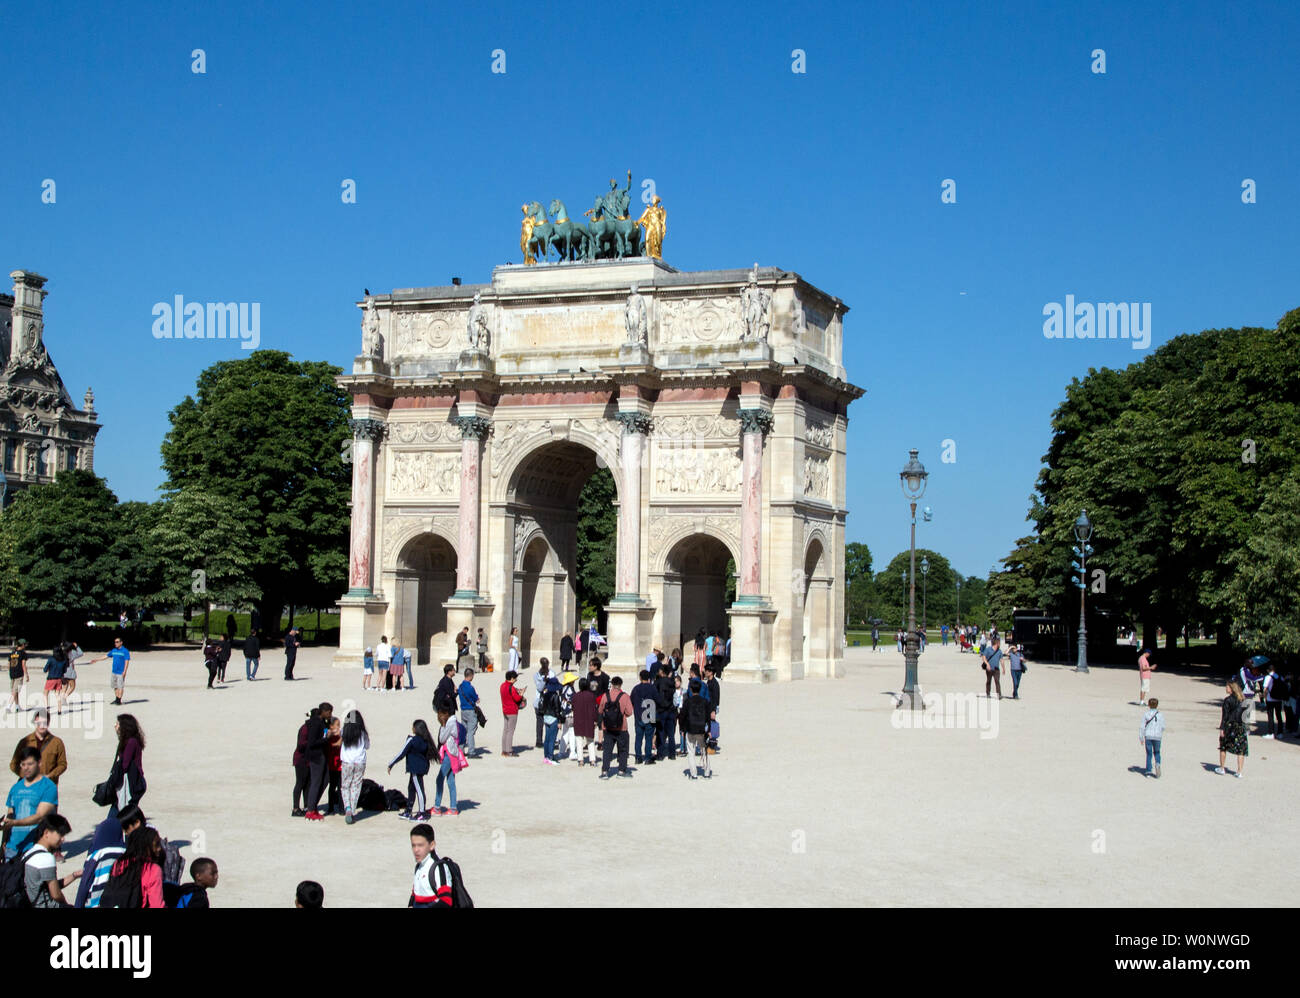 The Arc de Triomphe du Carrousel across from the Louvre in Paris France  The Corinthian style architecture commemorate Napoleon's military victories Stock Photo